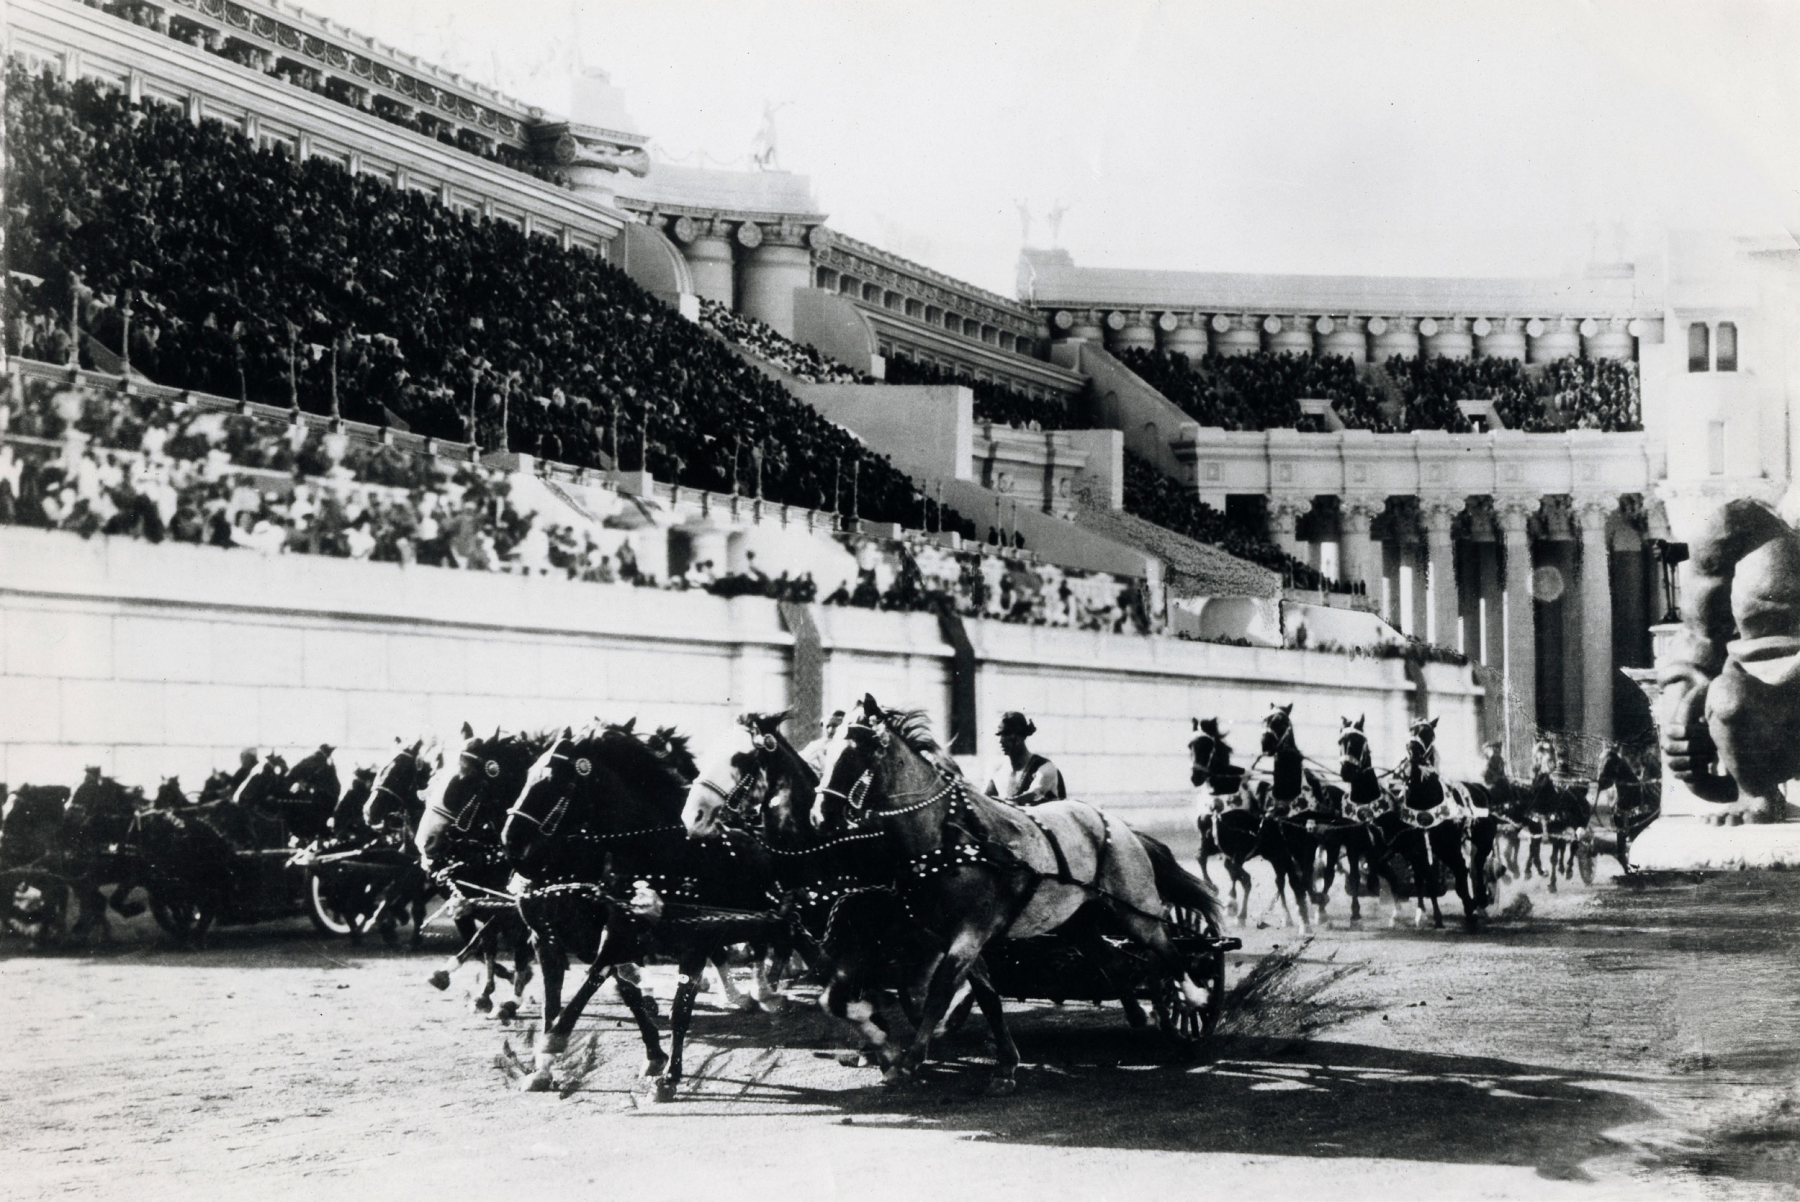 An advertisement for Ben-Hur: A Tale of the Christ (1925), featuring the chariot racing scene, United Archives GmbH/Alamy Stock Photo.
